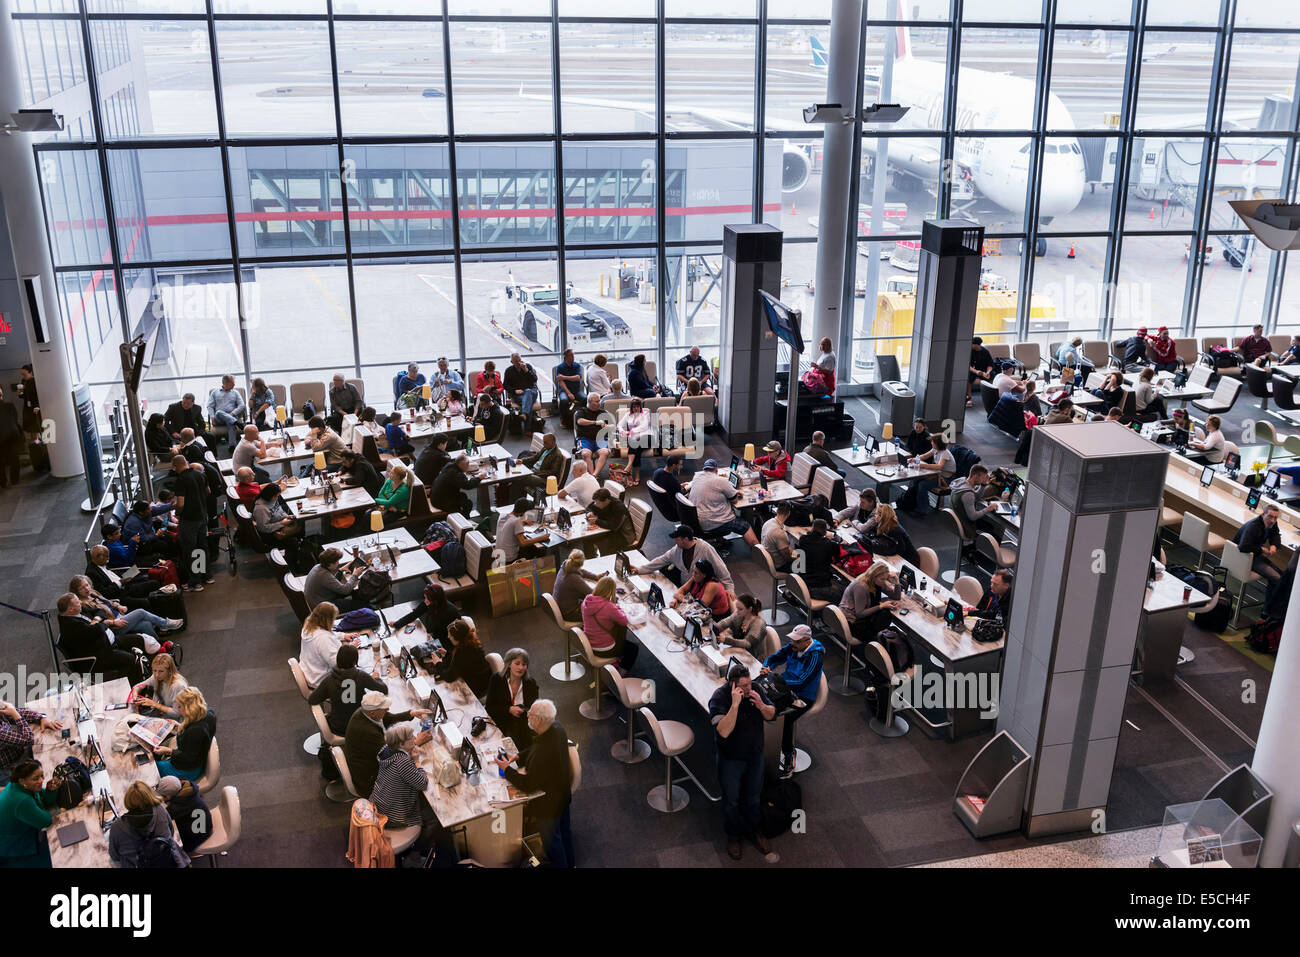 People in a waiting area of Toronto Pearson International airport, Canada 2014 Stock Photo